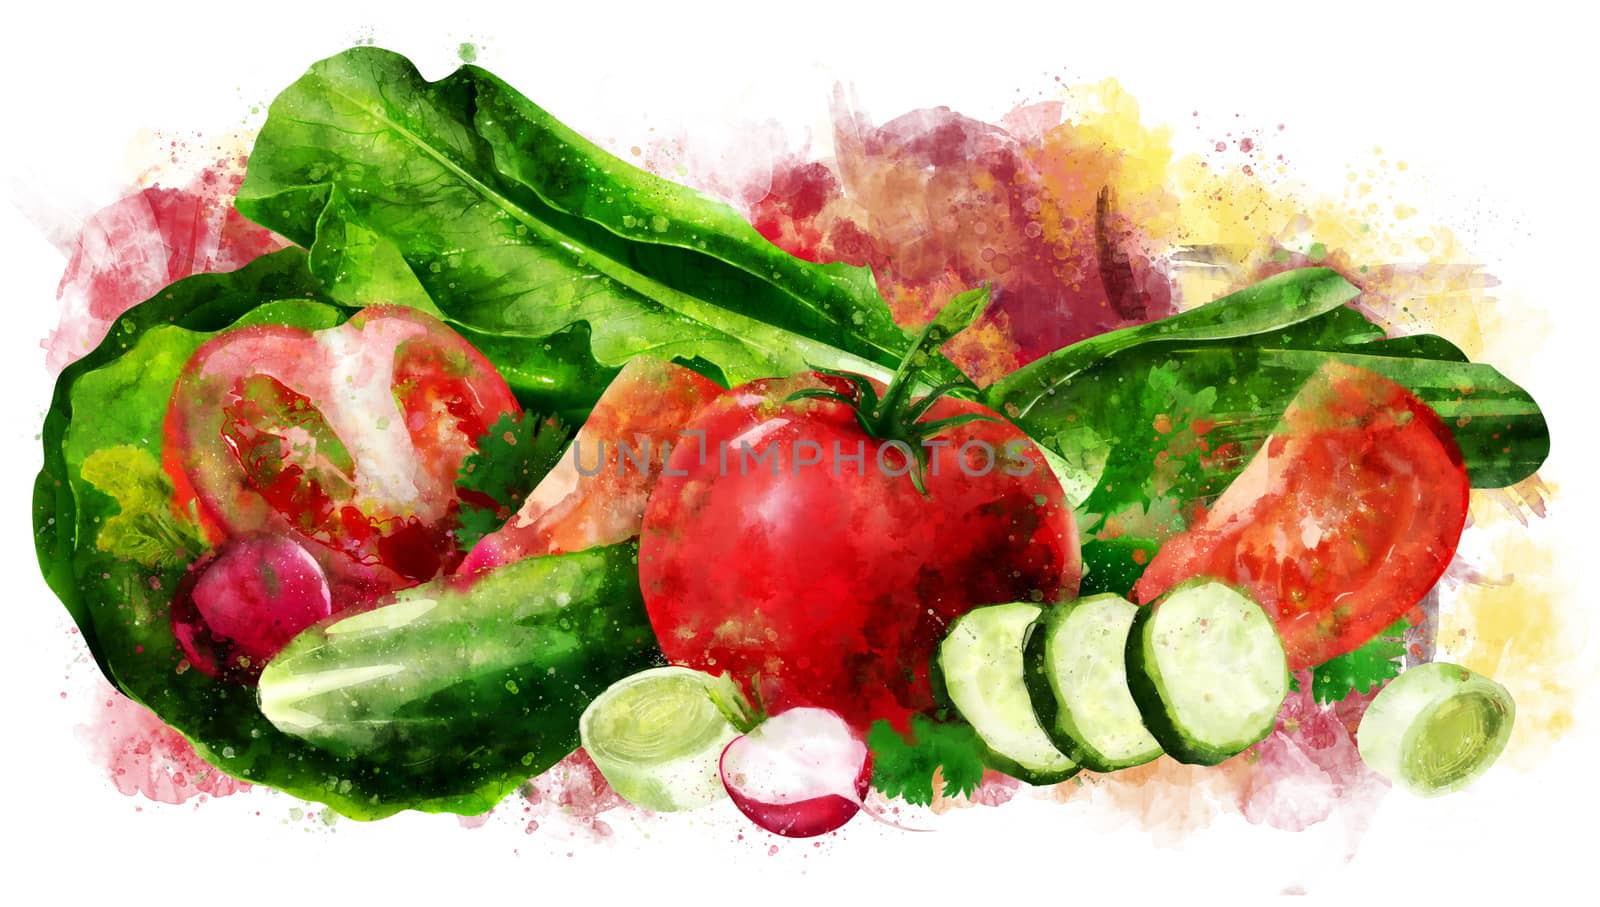 Tomato, cucumber and salad hand-painted illustration on a white background